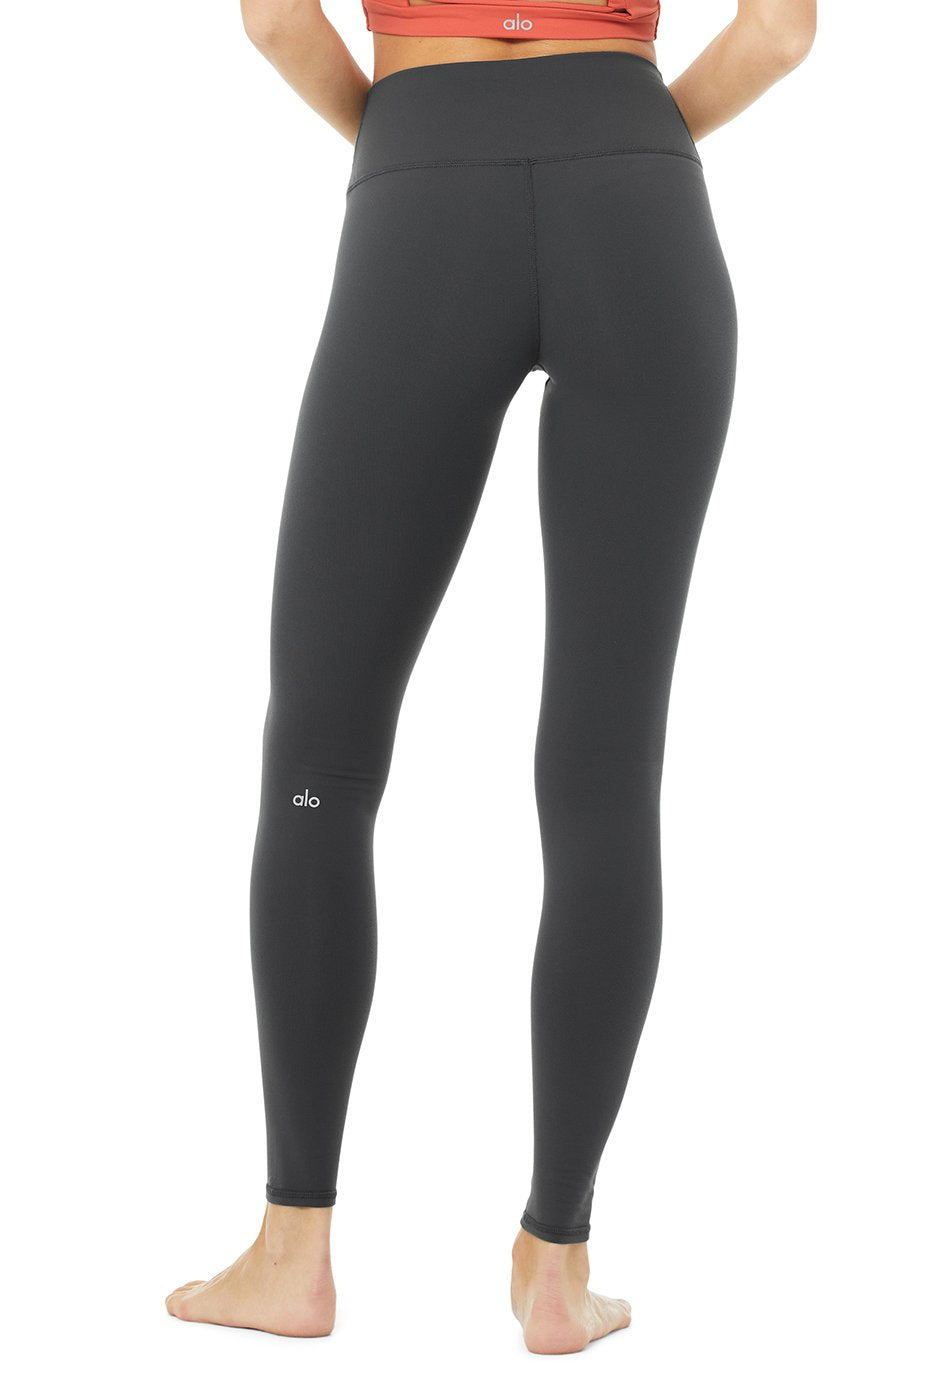 ALO Yoga High Waist Airbrush Leggings in Anthracite Womens Size S